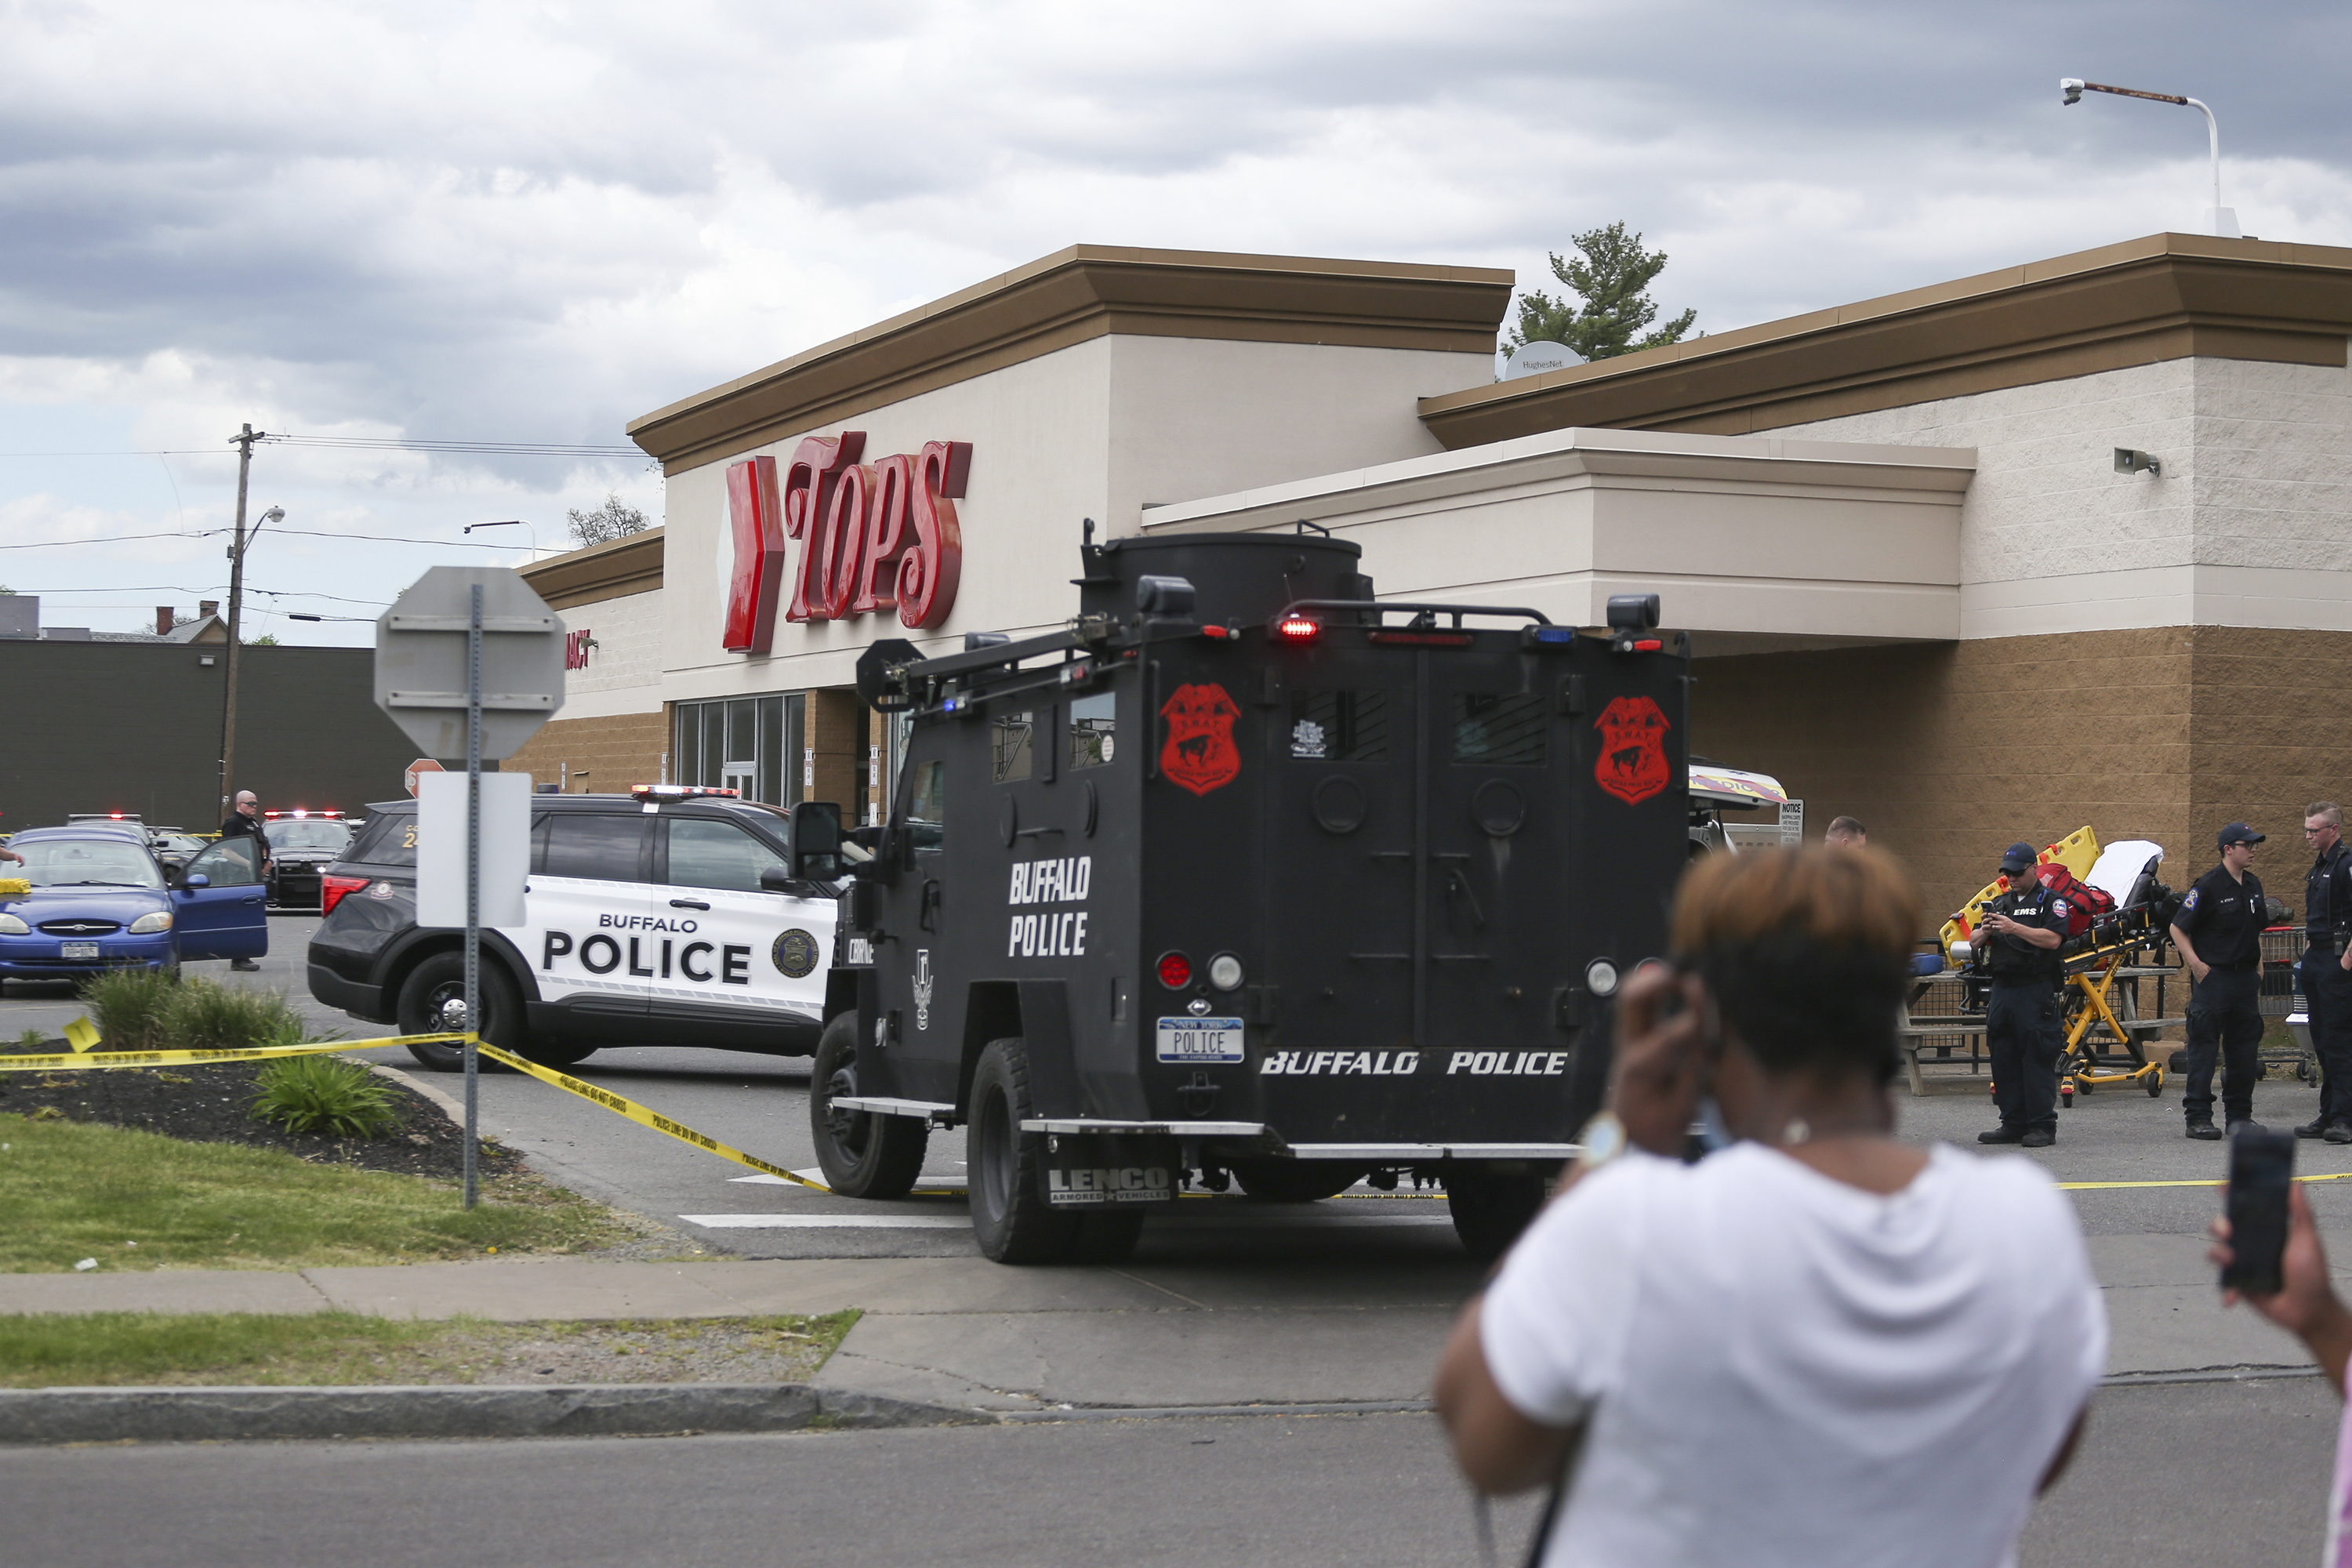 Police said multiple people were shot in what they described as a "mass shooting" at a Buffalo supermarket.